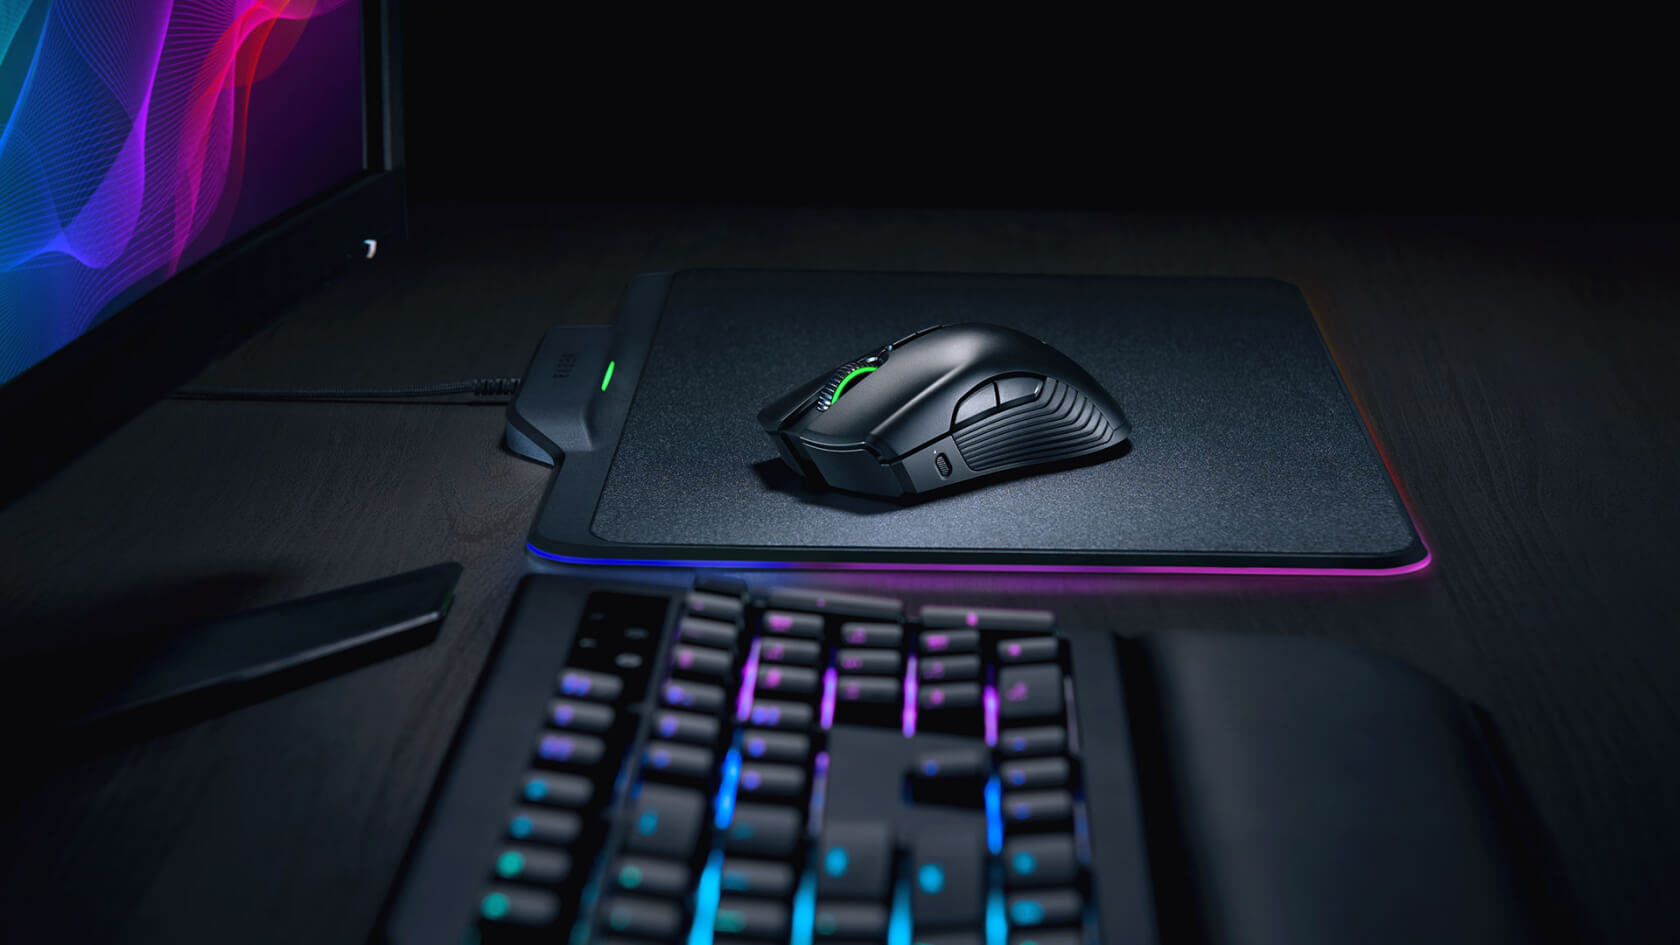 Razer showcases new HyperFlux mouse and charging pad